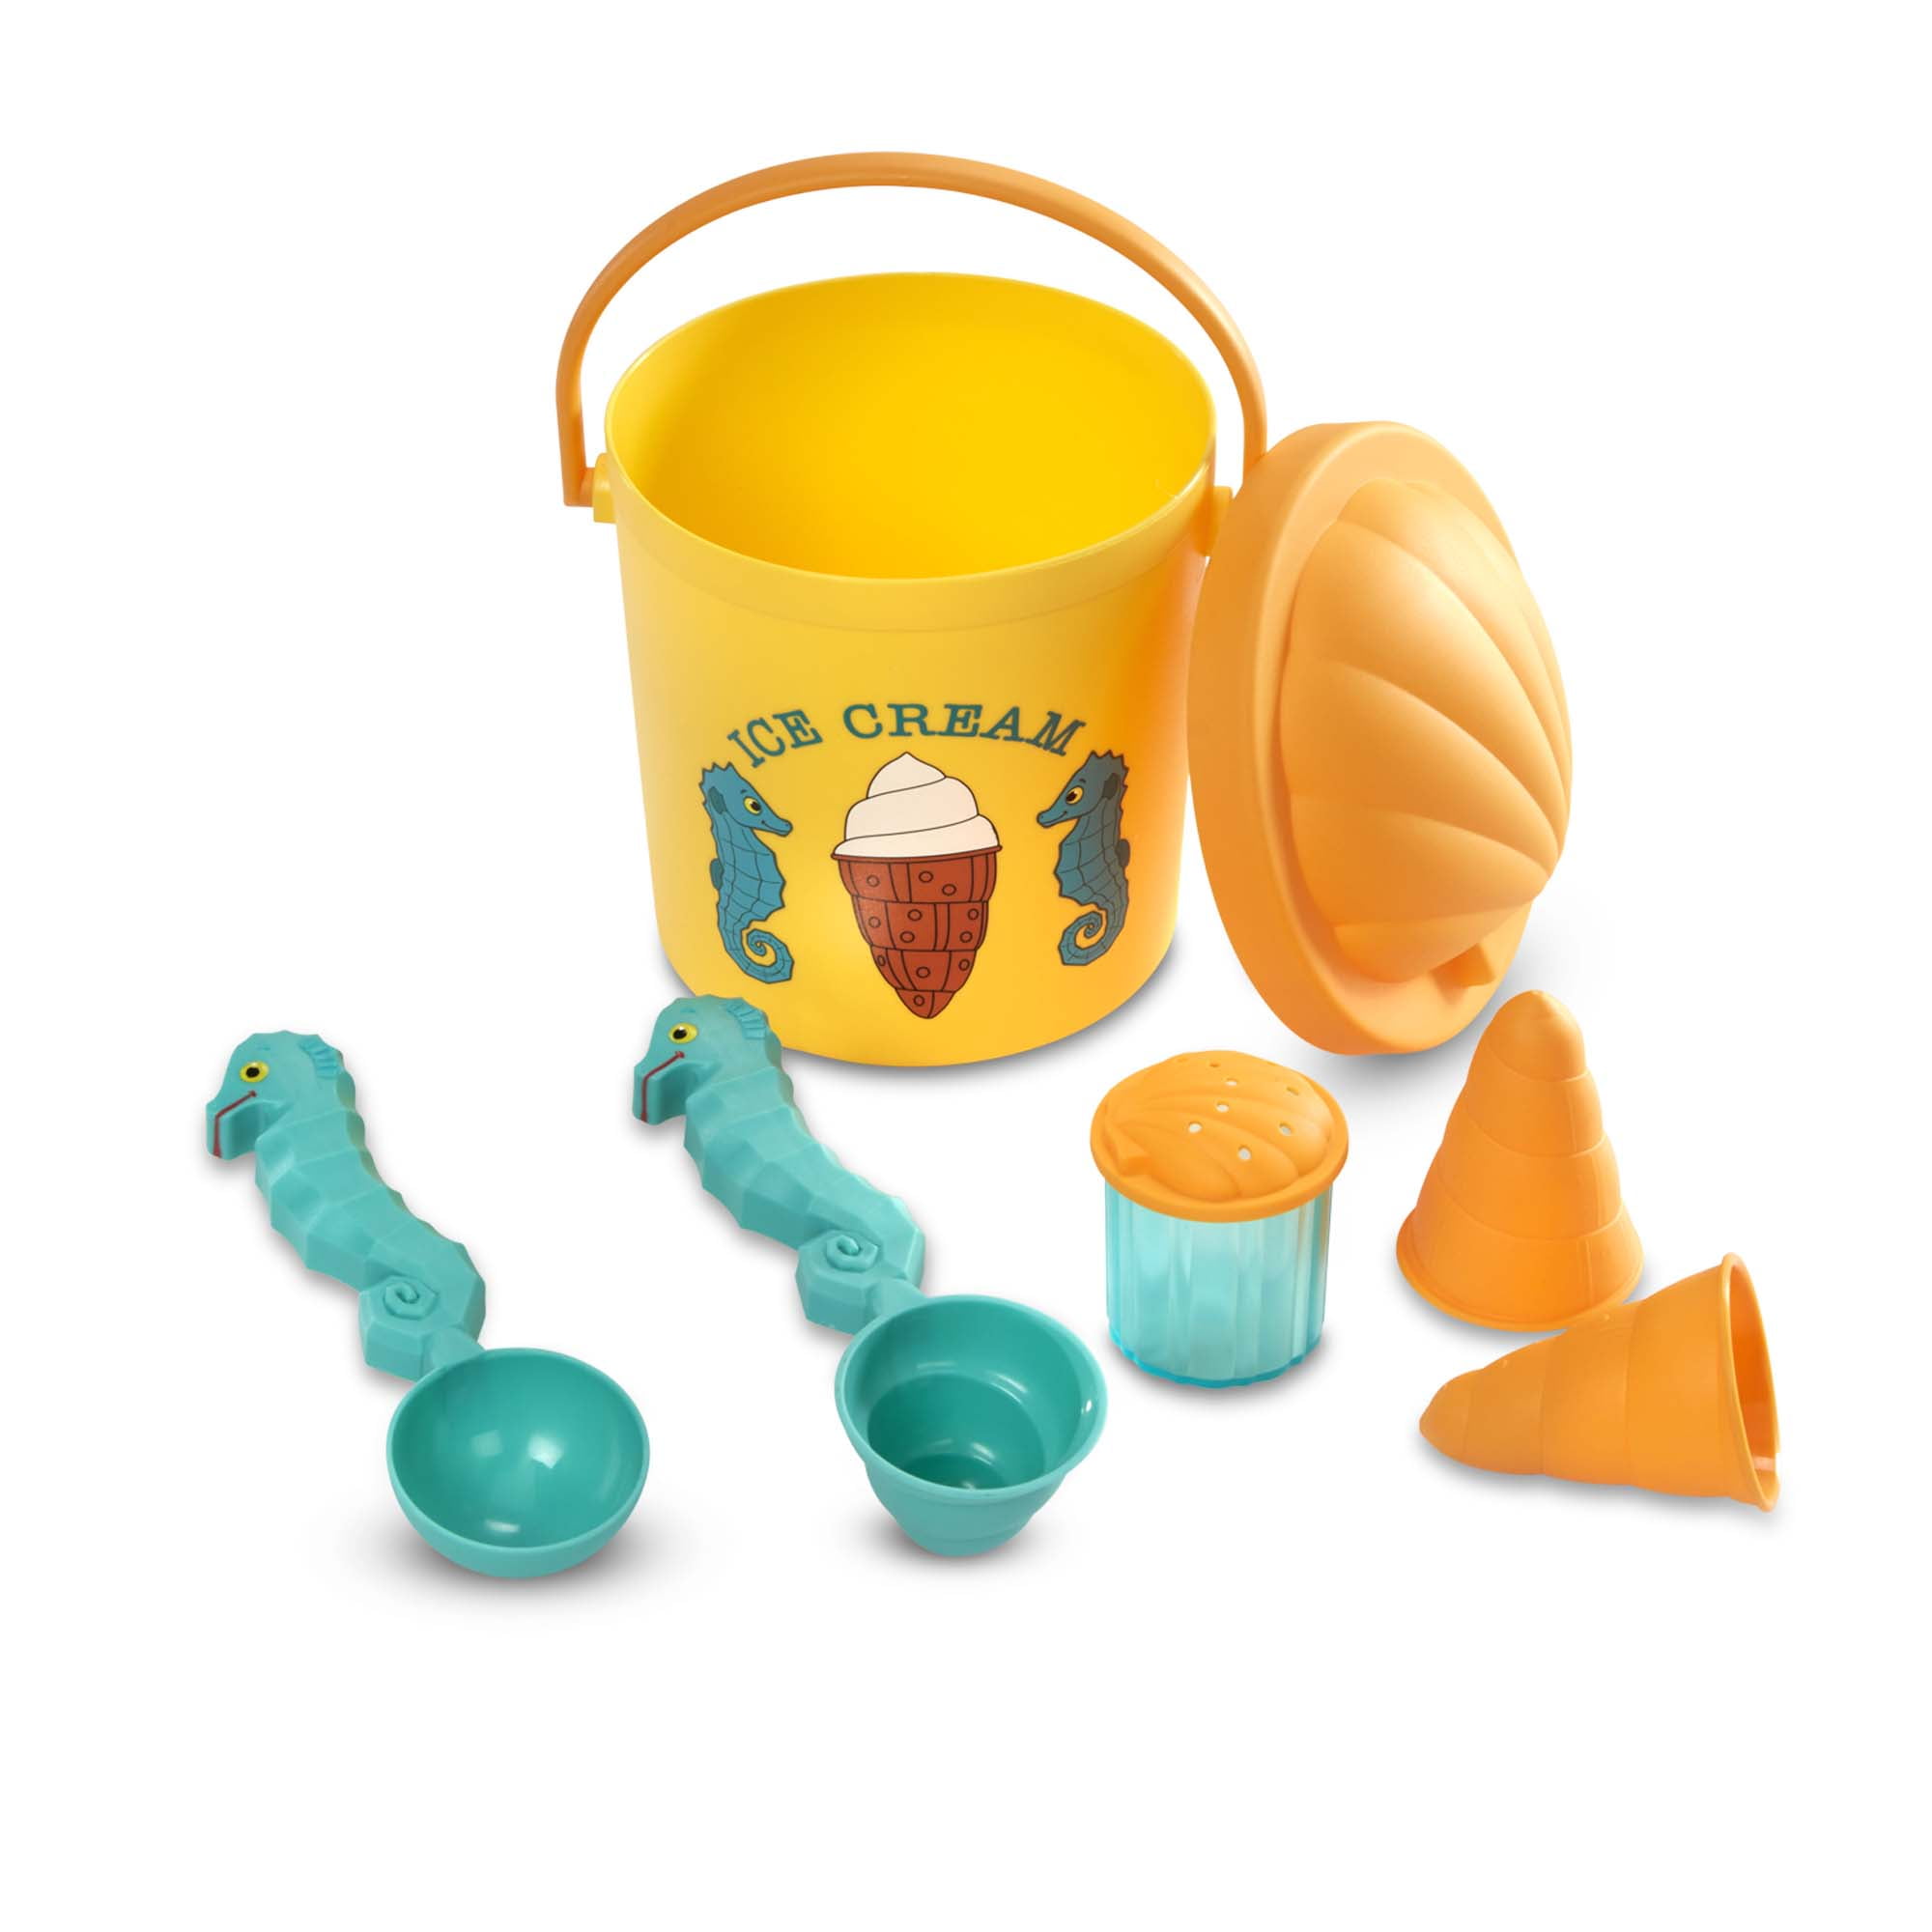 Sunny Patch Funnel Fun Toy Seaside Sidekicks Sand Sifting 16427 Melissa & Doug for sale online